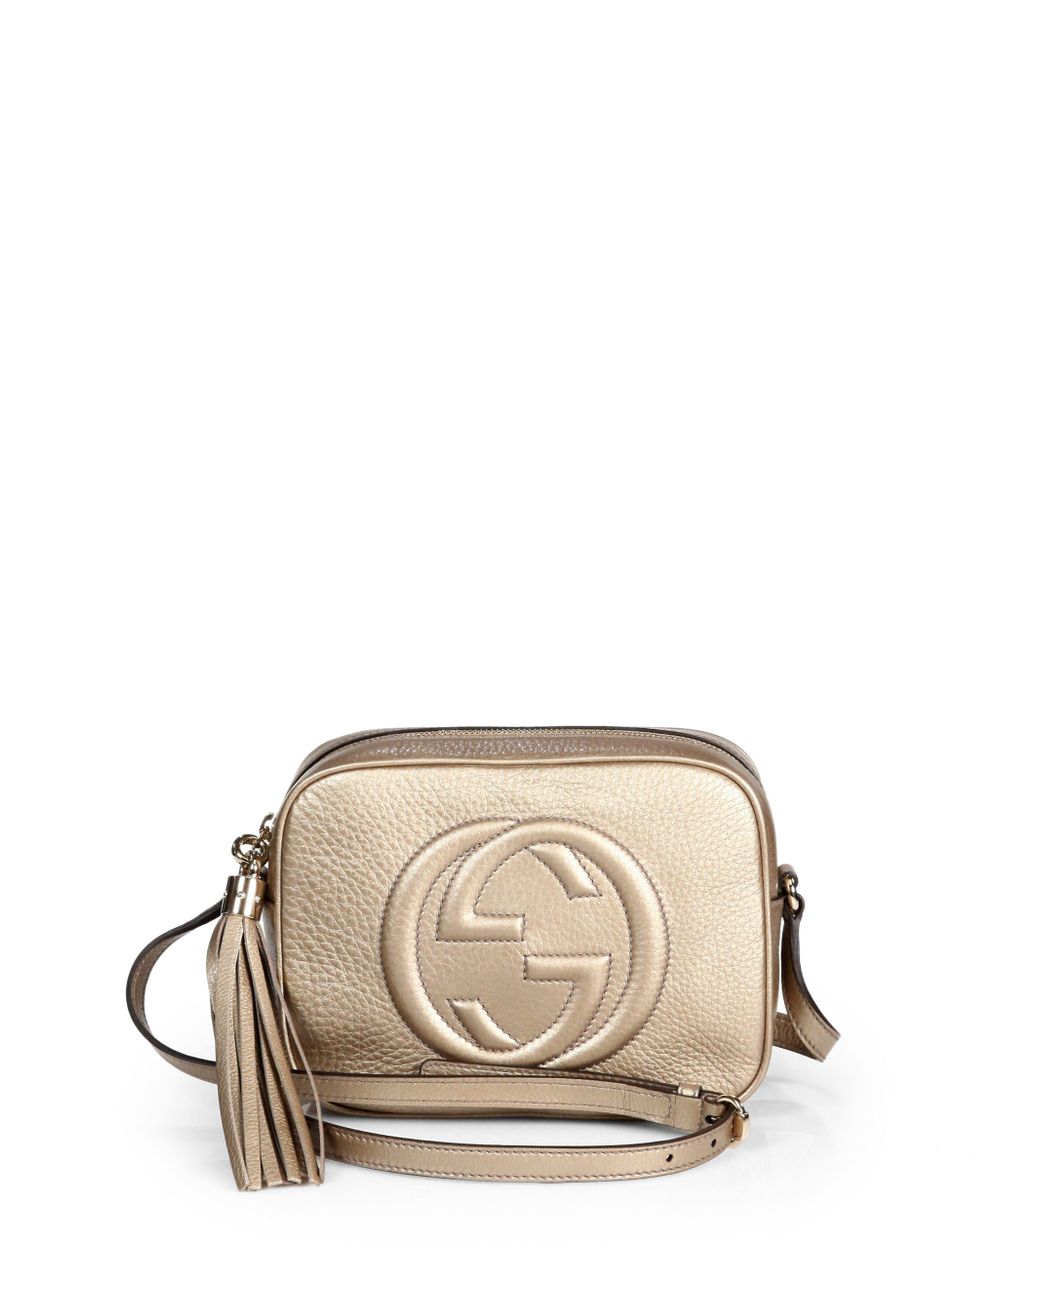 Gucci Soho Metallic Leather Disco Bag in Natural | Lyst